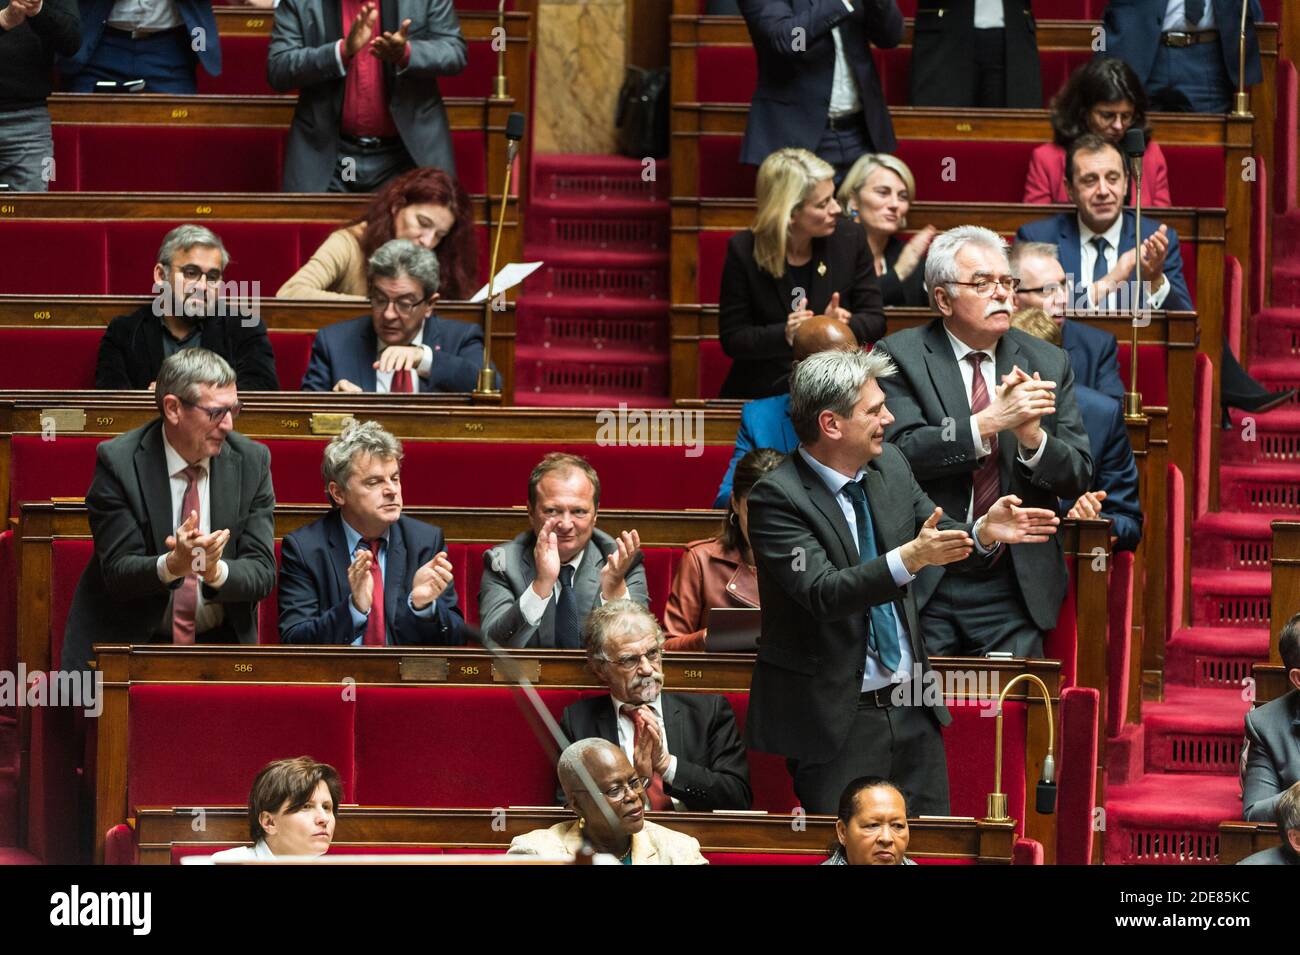 Group Gauche Democrate et Republicaine (Democrat and Republican Left) applauses MP Richard Ramos (MODEM) during Question Time at the Palais Bourbon, home of The French National Assembly, in Paris, France, January 16, 2019. Photo by Daniel Derajinski/ABACAPRESS.COM Stock Photo